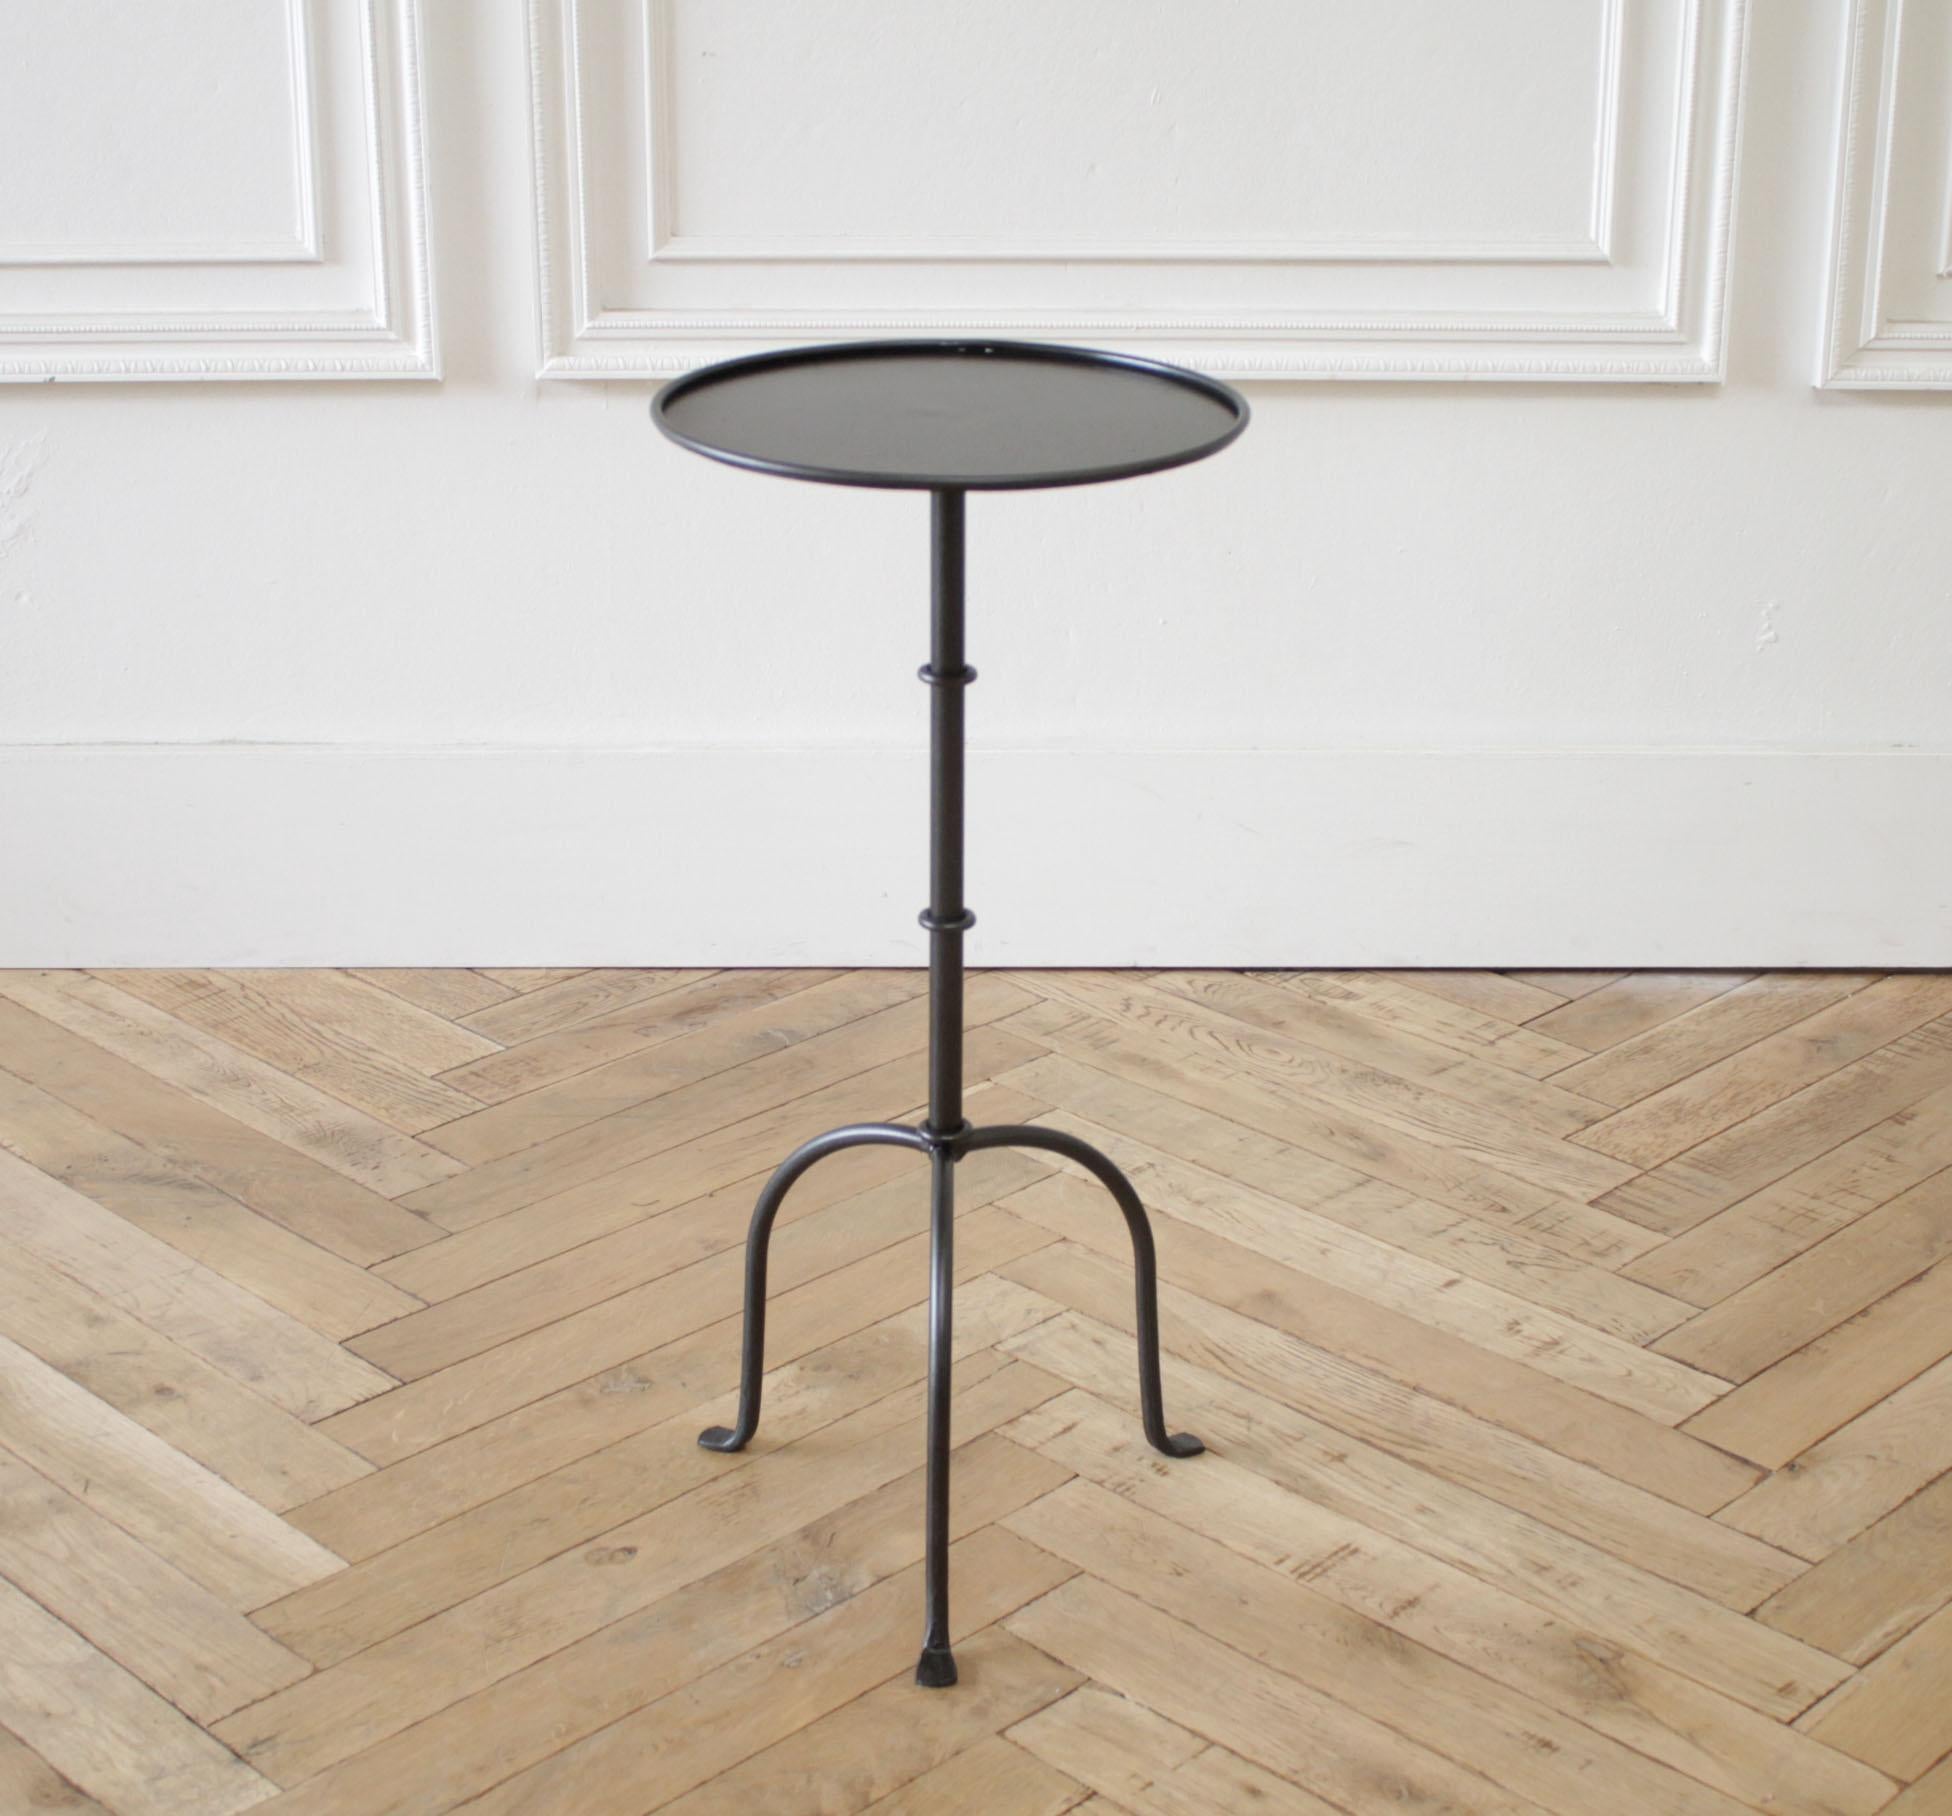 Cannes tall iron drink table in iron finish or brass finish
Inspired by the antique version, this tall drink table is forged iron with a round table top. Offered in either the dark iron finish, or antique brass colored finish.
Made in the USA,